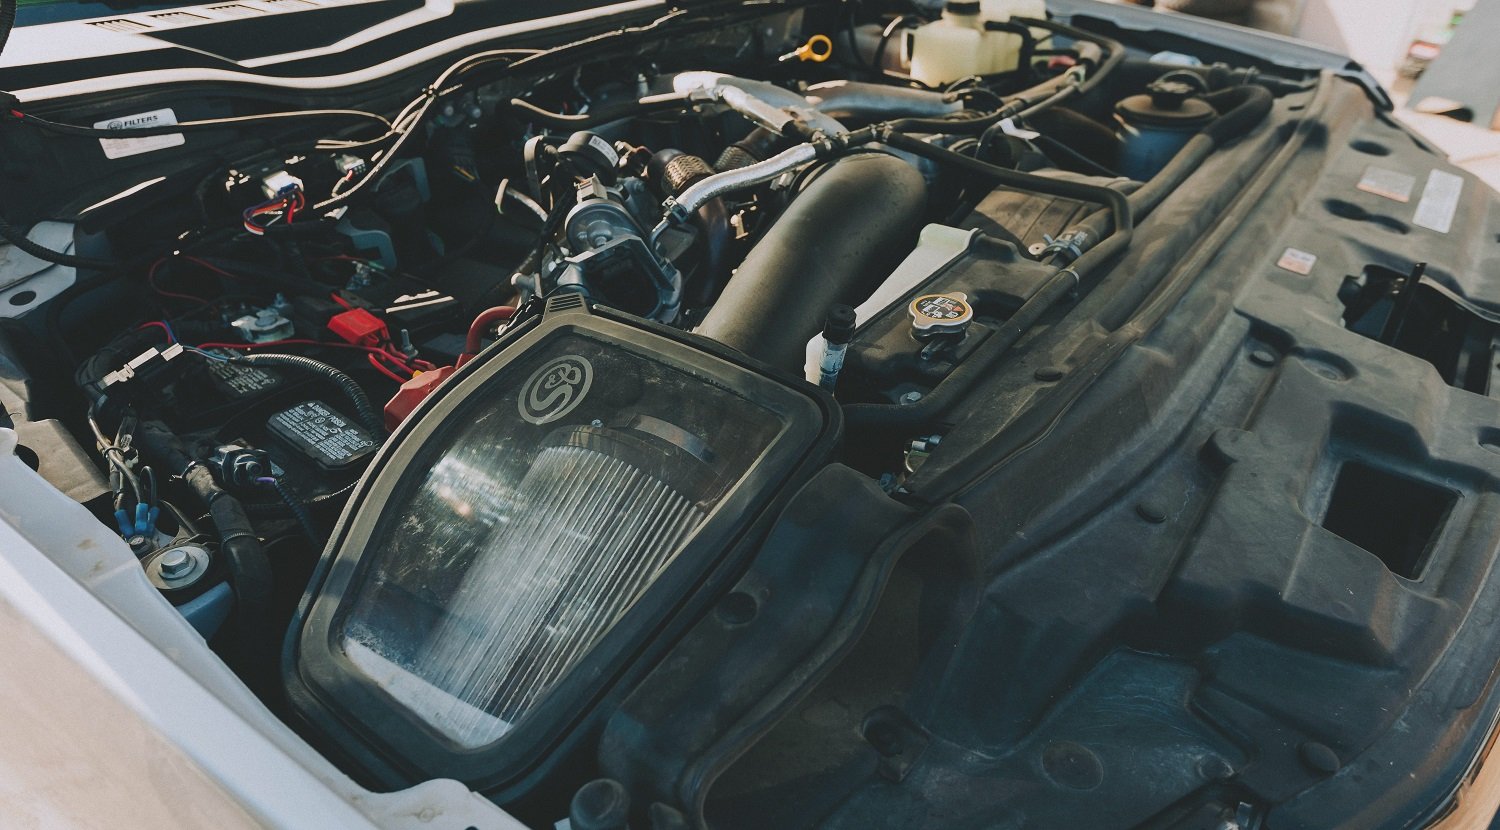 Open vs. Closed Cold Air Intake: Which is Better?